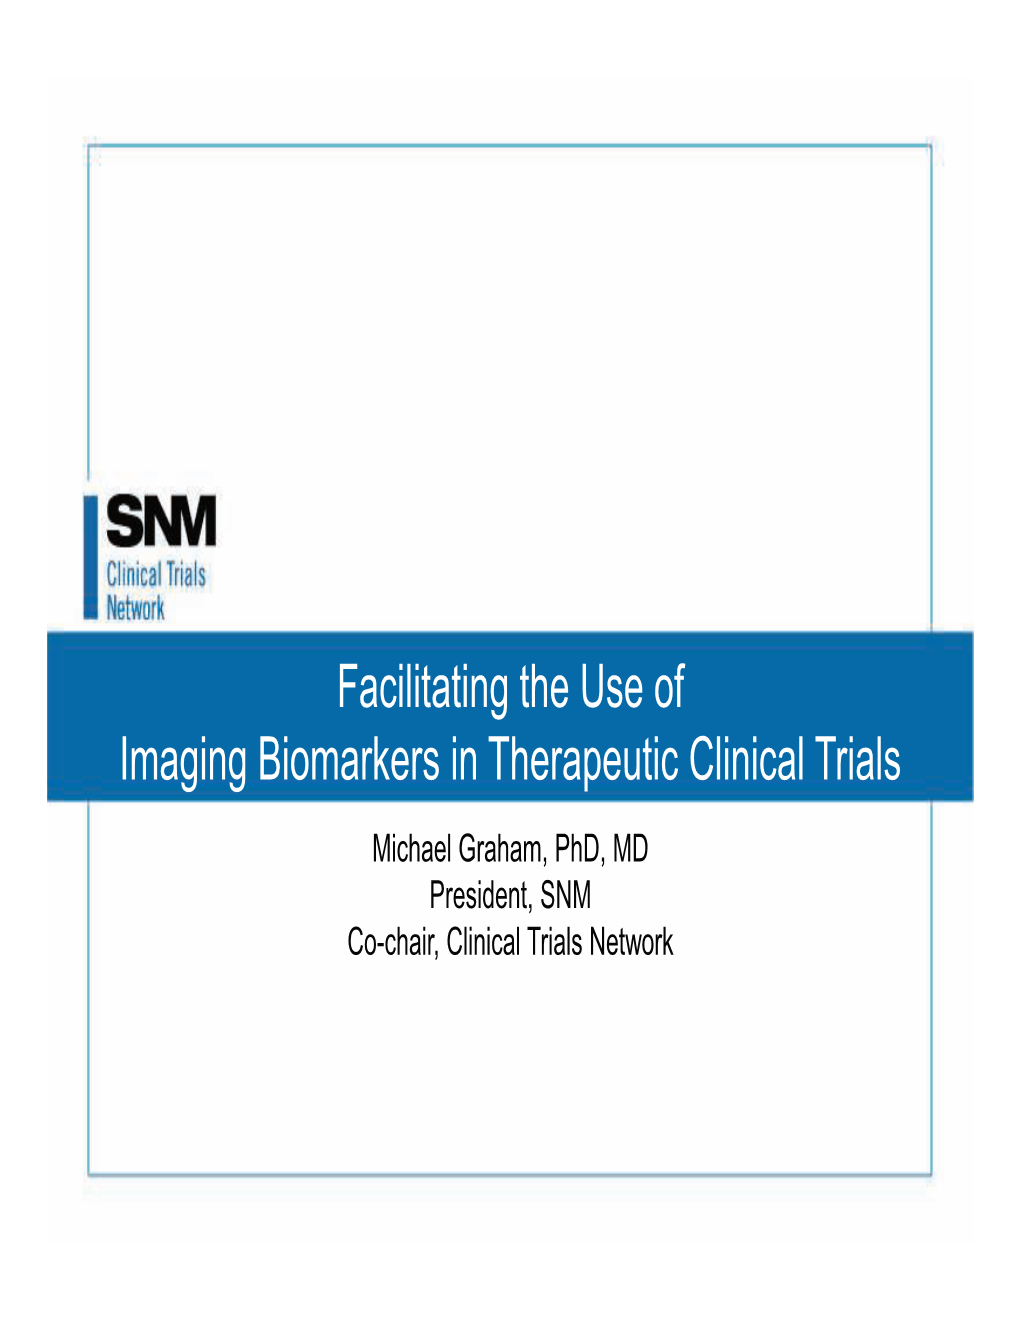 Facilitating the Use of Imaging Biomarkers in Therapeutic Clinical